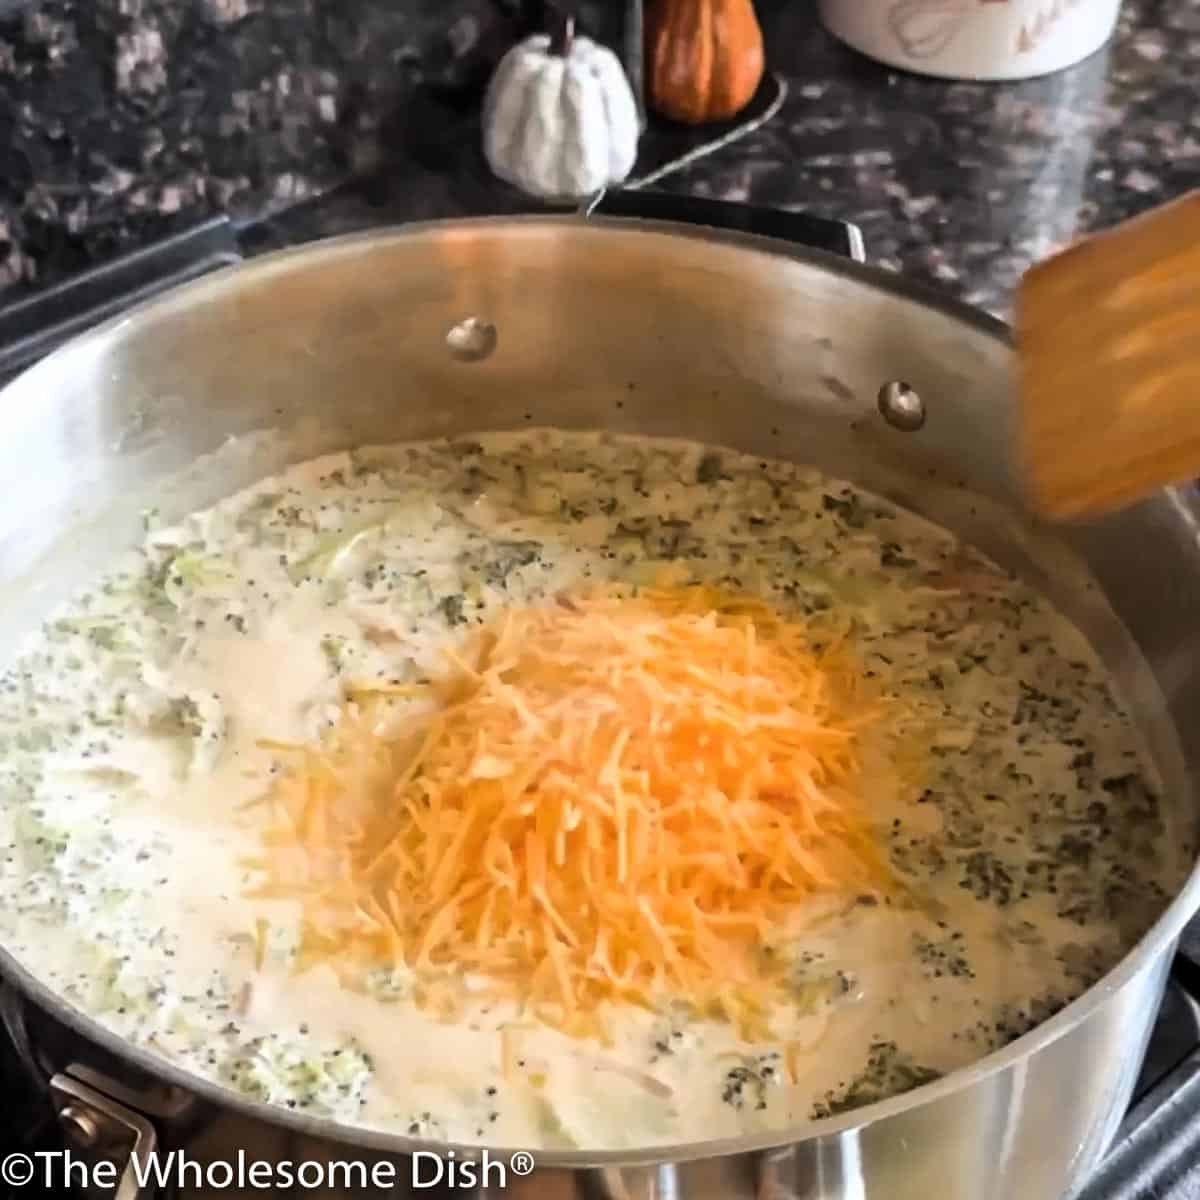 Adding shredded cheddar cheese to the soup pot full of broccoli soup.